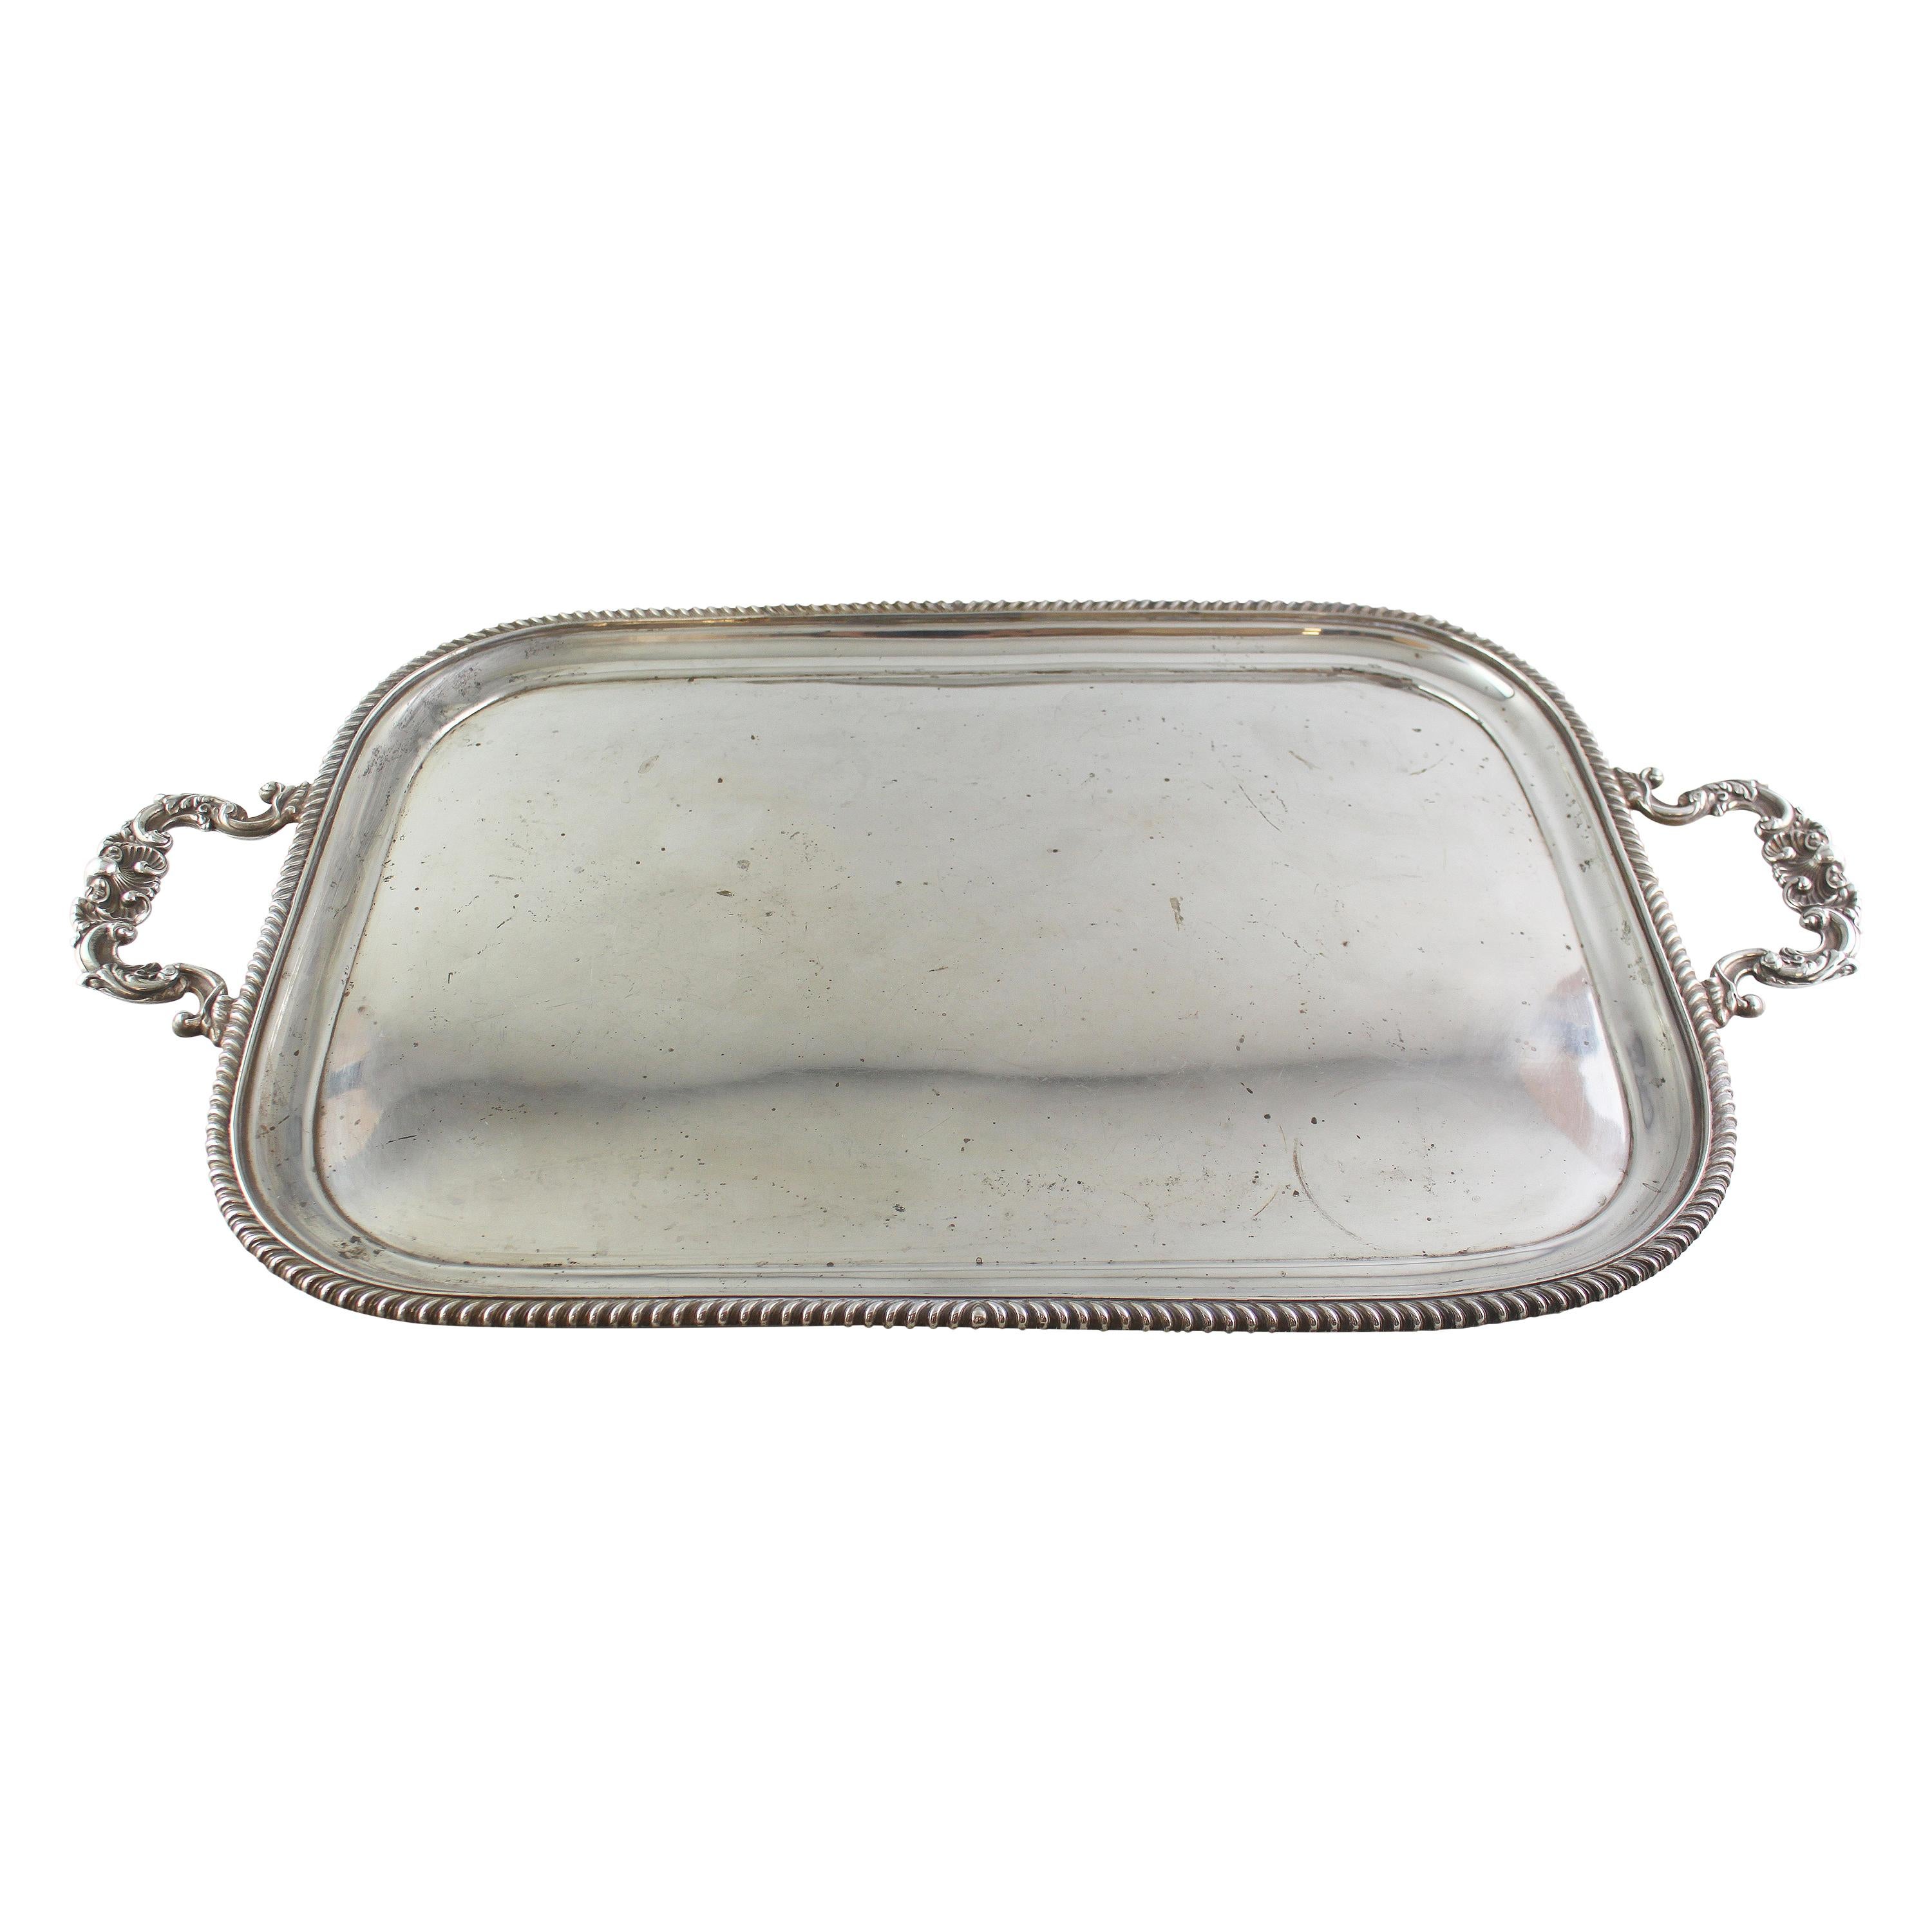 Antique Sterling Silver Large Serving Tray, Chester 1912, Barker Brothers